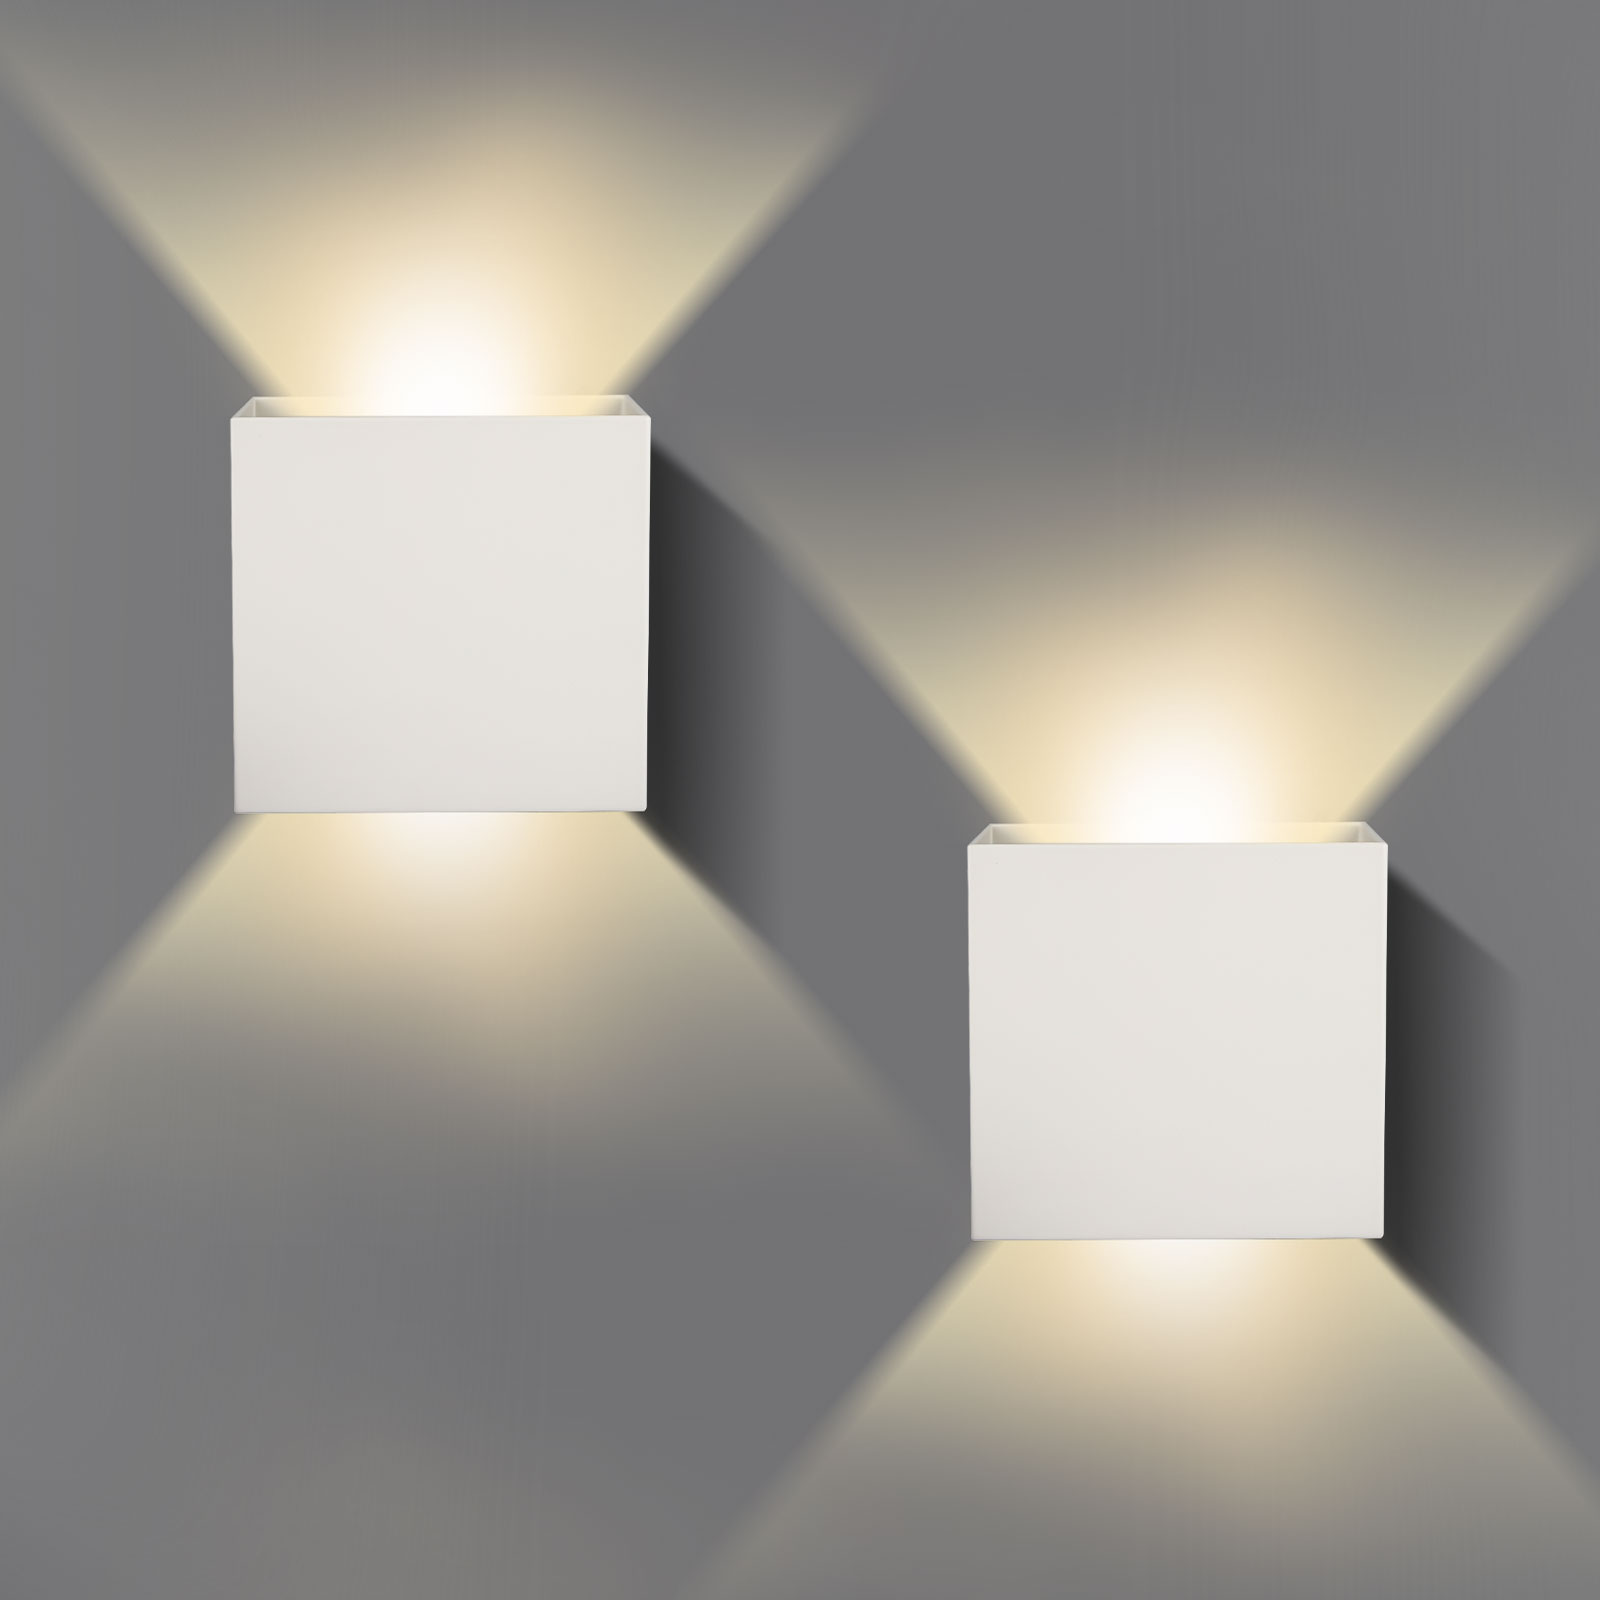 Cube LED Wall Lights Modern Up Down Sconce Lighting Fixture Lamp Indoor Outdoor 